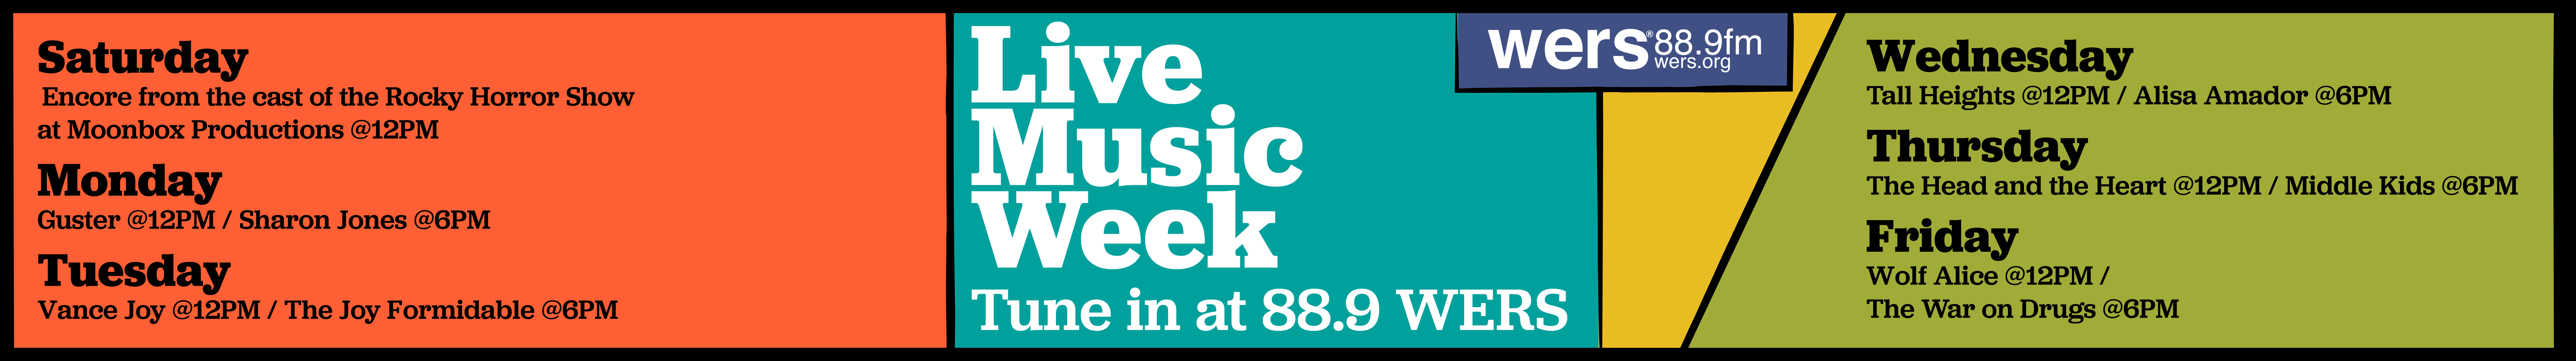 Live Music Week Can't miss songs